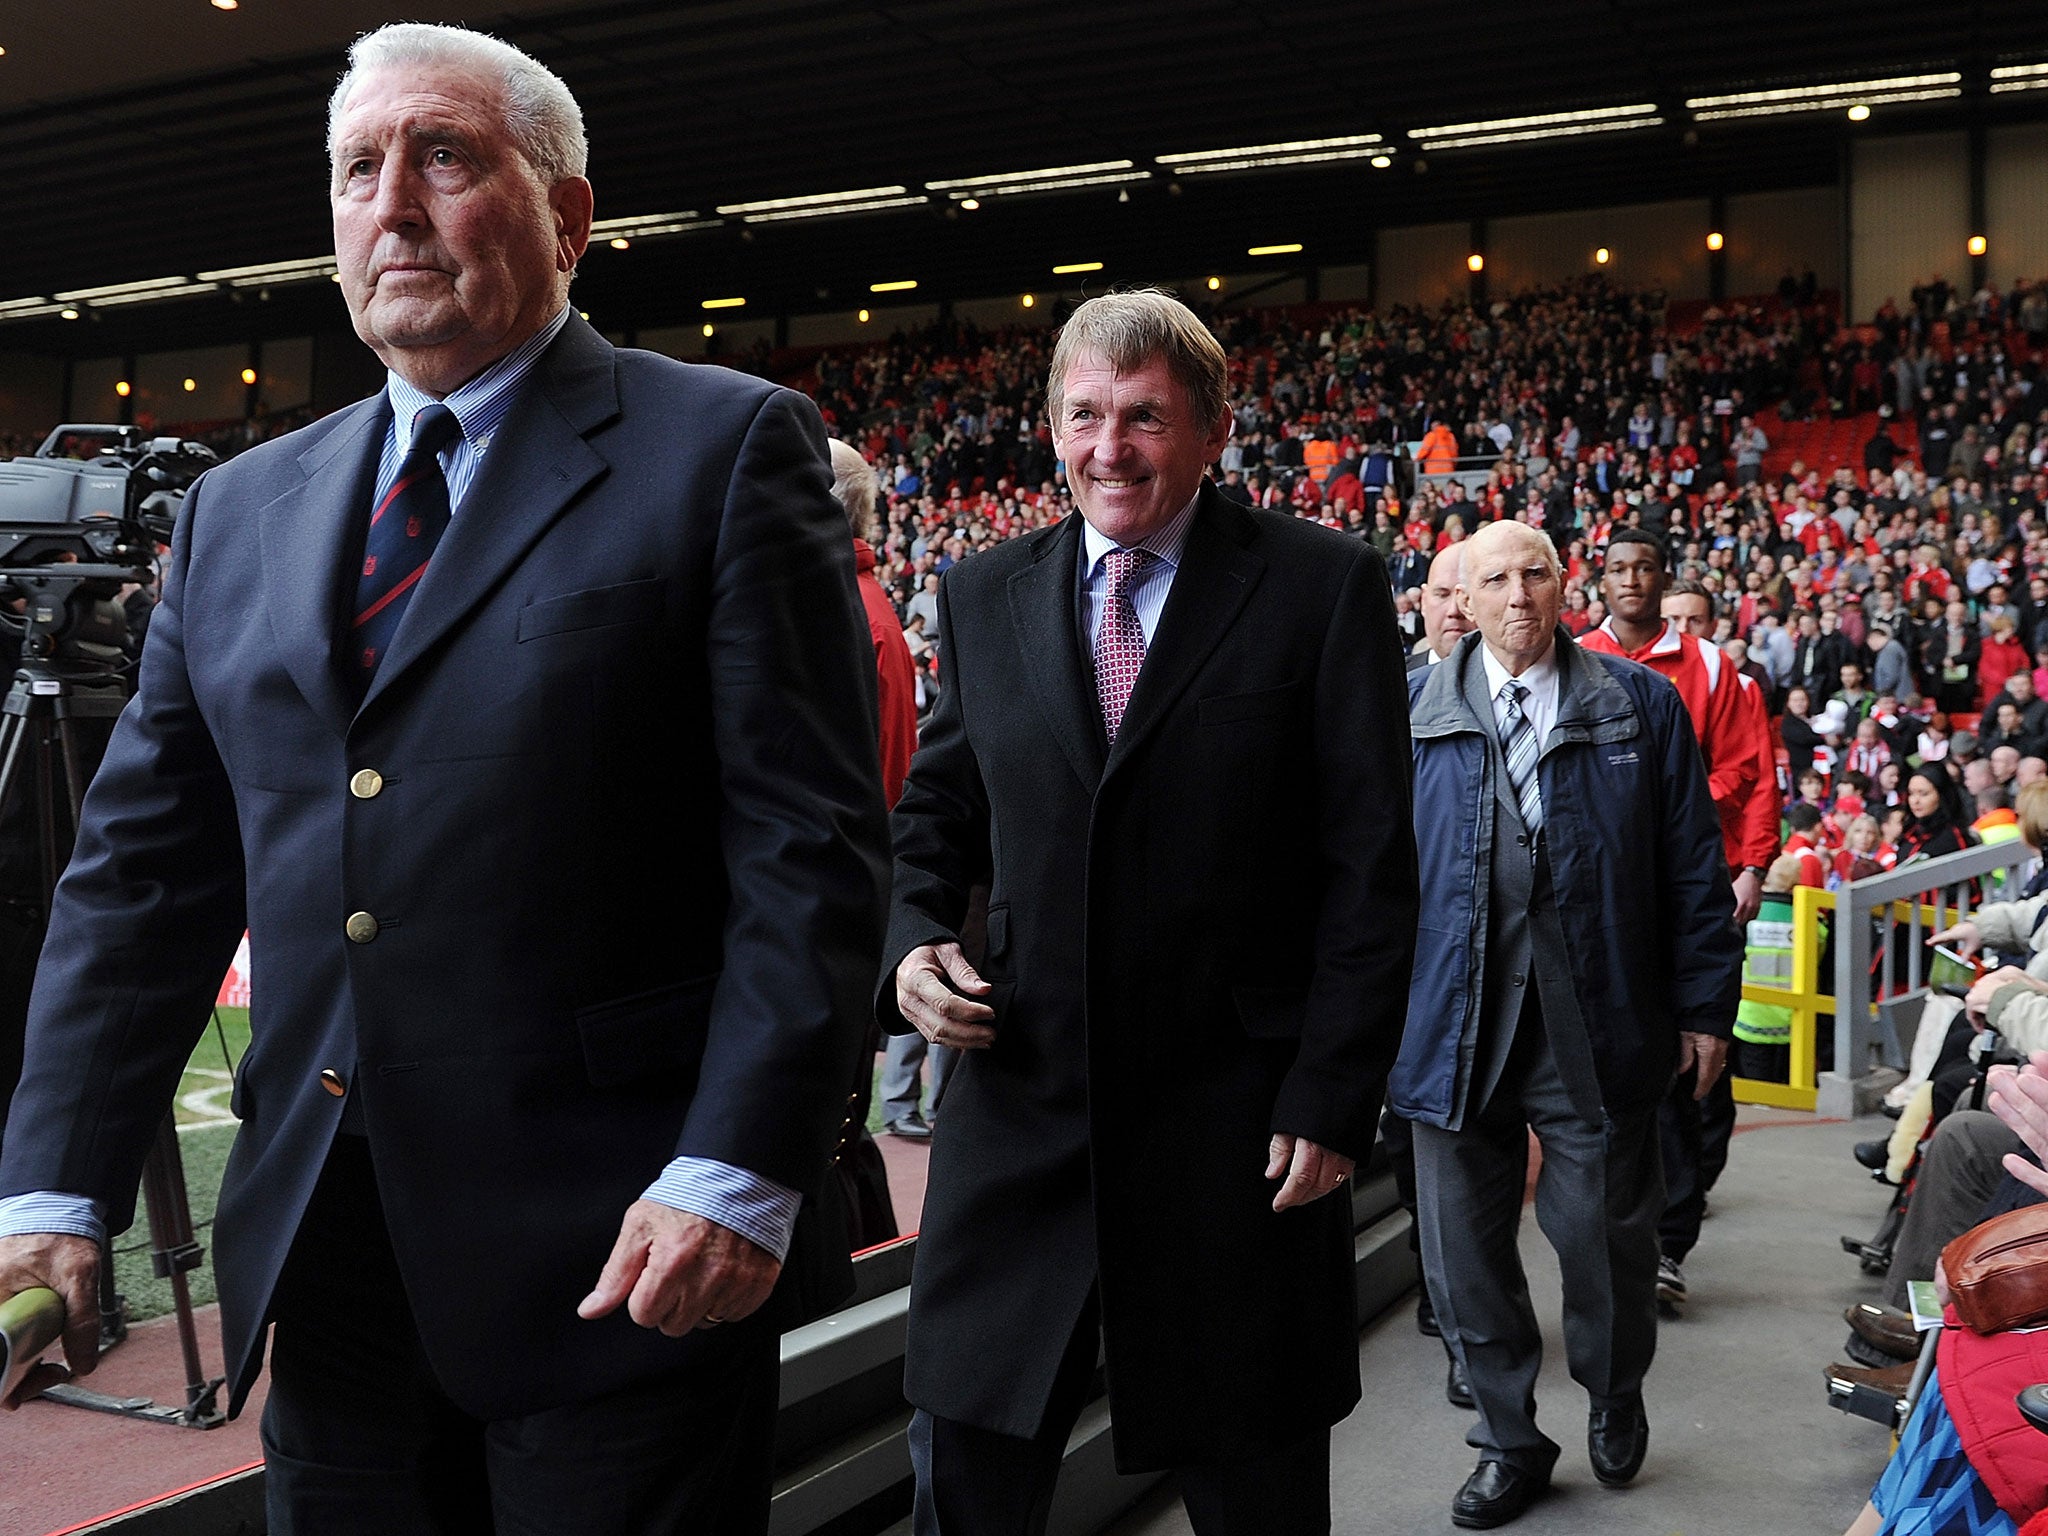 Moran (right) became Liverpool's caretaker manager when Kenny Dalglish (centre) left in 1991